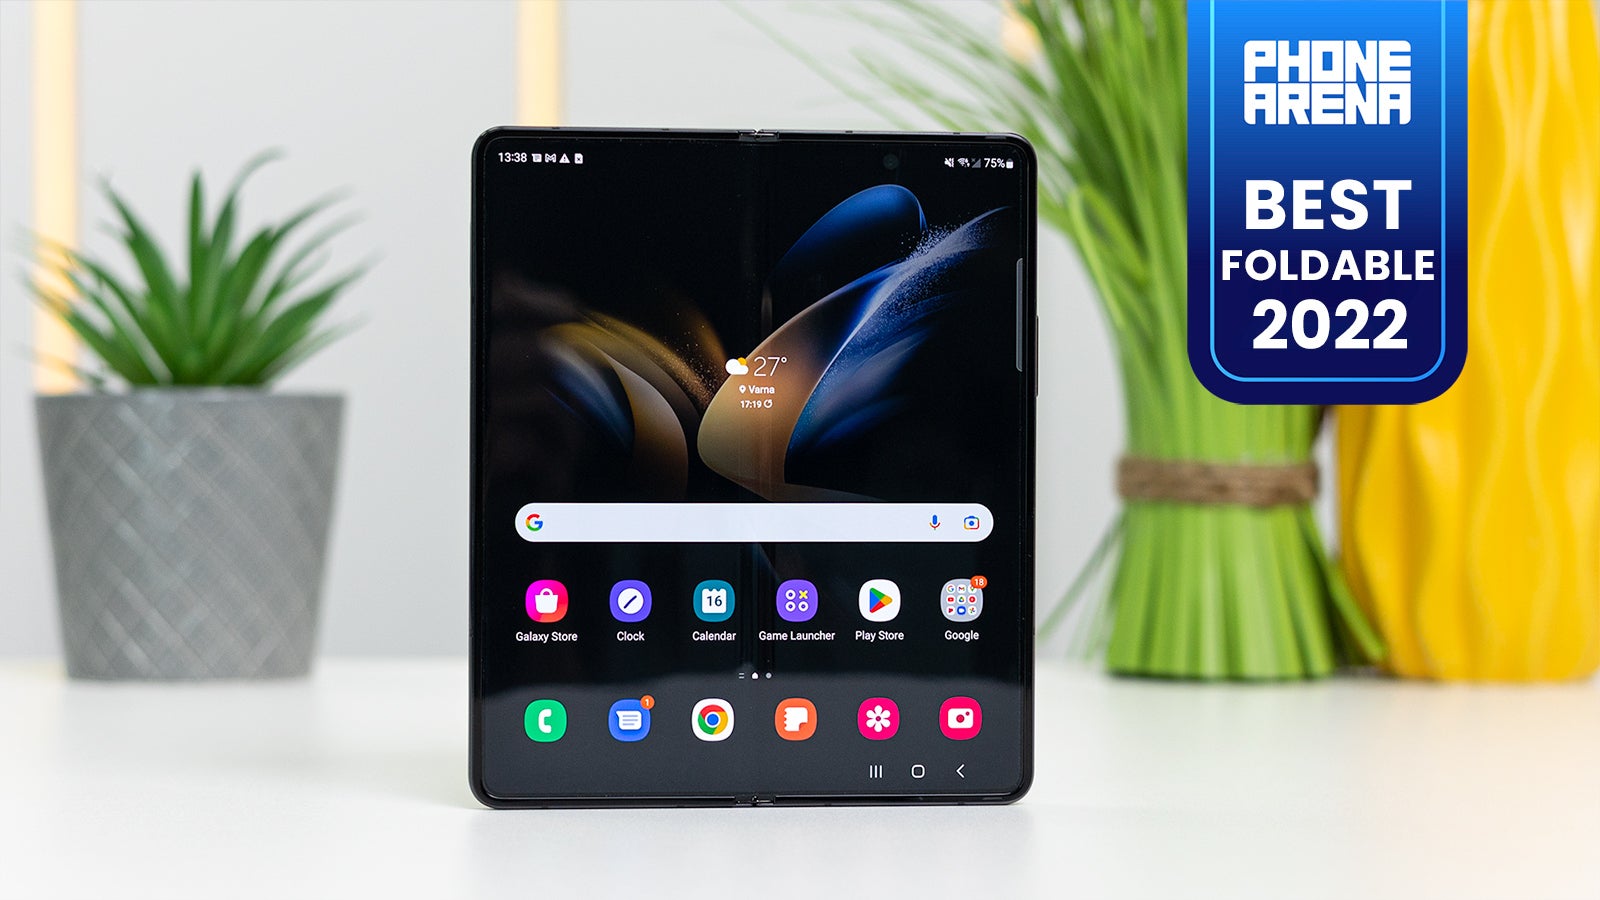 (Image Credit - PhoneArena) There wasn&#039;t really too much competition for the Galaxy Z Fold 4 this year - PhoneArena Awards 2022: Best Phones of the Year!